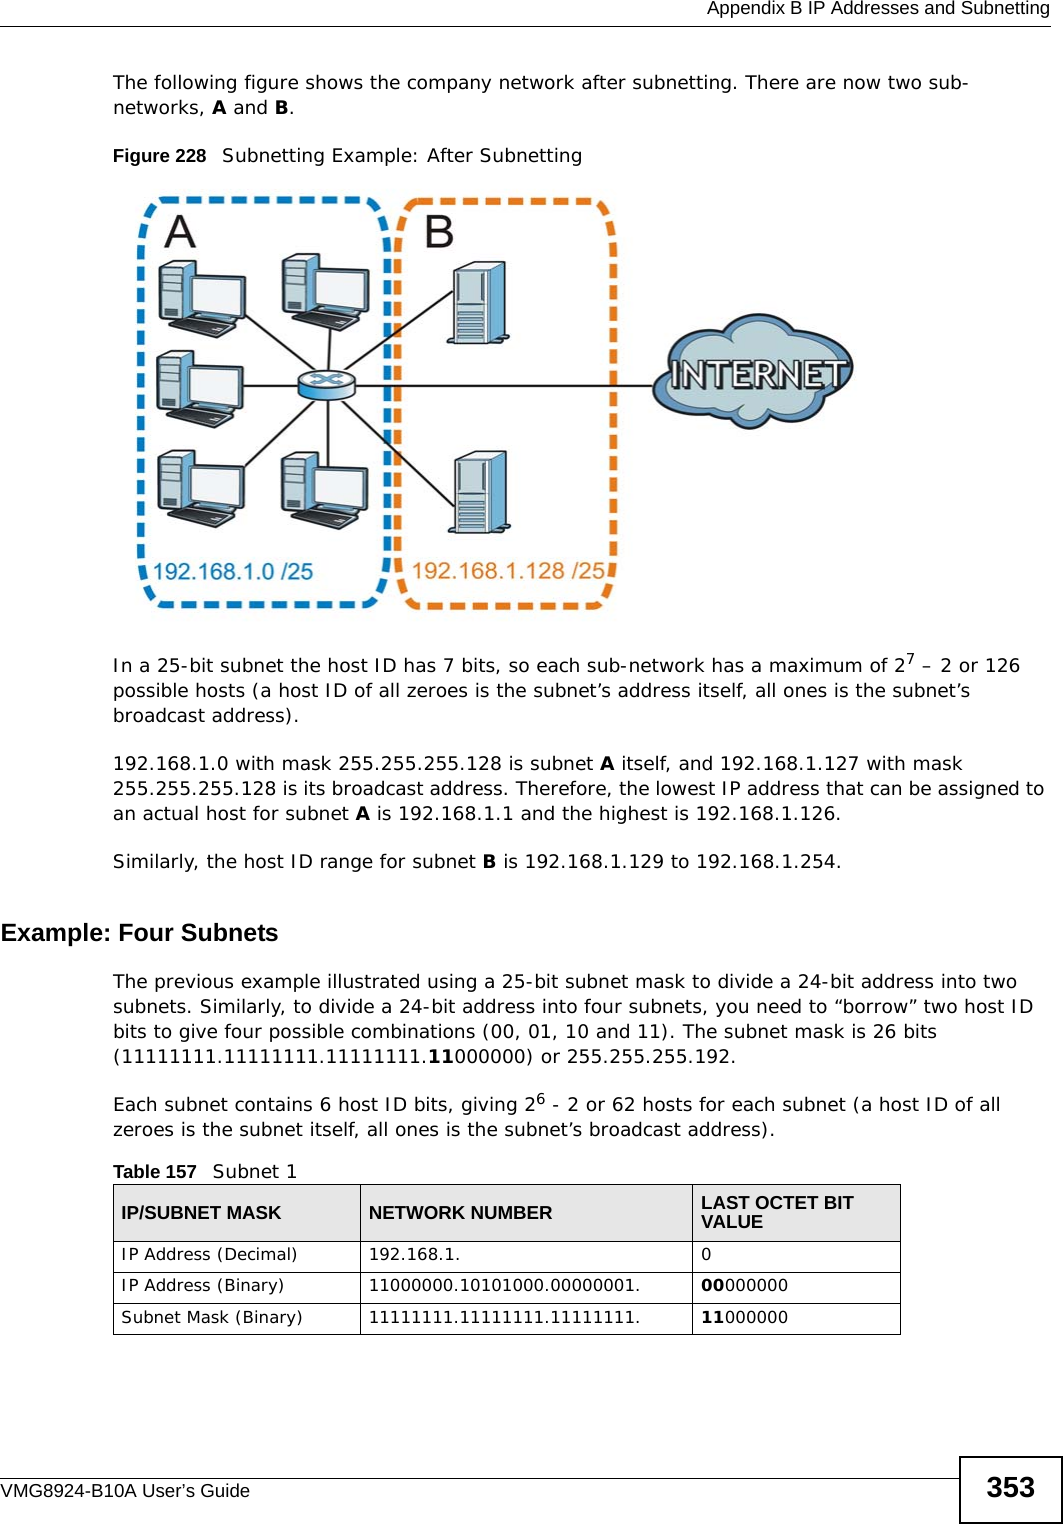  Appendix B IP Addresses and SubnettingVMG8924-B10A User’s Guide 353The following figure shows the company network after subnetting. There are now two sub-networks, A and B. Figure 228   Subnetting Example: After SubnettingIn a 25-bit subnet the host ID has 7 bits, so each sub-network has a maximum of 27 – 2 or 126 possible hosts (a host ID of all zeroes is the subnet’s address itself, all ones is the subnet’s broadcast address).192.168.1.0 with mask 255.255.255.128 is subnet A itself, and 192.168.1.127 with mask 255.255.255.128 is its broadcast address. Therefore, the lowest IP address that can be assigned to an actual host for subnet A is 192.168.1.1 and the highest is 192.168.1.126. Similarly, the host ID range for subnet B is 192.168.1.129 to 192.168.1.254.Example: Four Subnets The previous example illustrated using a 25-bit subnet mask to divide a 24-bit address into two subnets. Similarly, to divide a 24-bit address into four subnets, you need to “borrow” two host ID bits to give four possible combinations (00, 01, 10 and 11). The subnet mask is 26 bits (11111111.11111111.11111111.11000000) or 255.255.255.192. Each subnet contains 6 host ID bits, giving 26 - 2 or 62 hosts for each subnet (a host ID of all zeroes is the subnet itself, all ones is the subnet’s broadcast address). Table 157   Subnet 1IP/SUBNET MASK NETWORK NUMBER LAST OCTET BIT VALUEIP Address (Decimal) 192.168.1. 0IP Address (Binary) 11000000.10101000.00000001. 00000000Subnet Mask (Binary) 11111111.11111111.11111111. 11000000